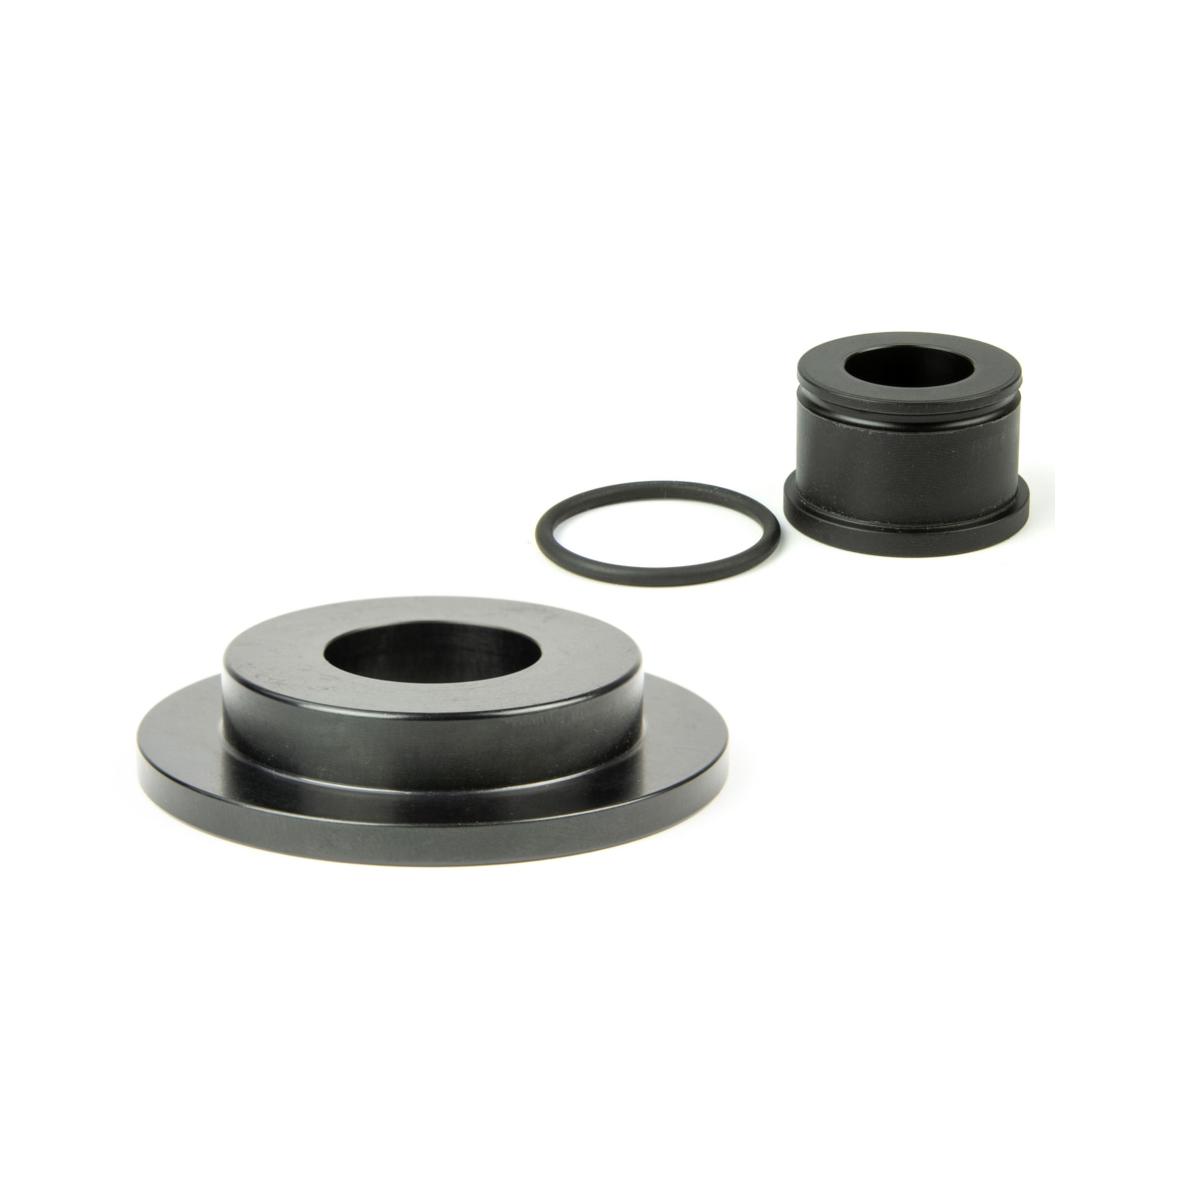 Bump Spring Components